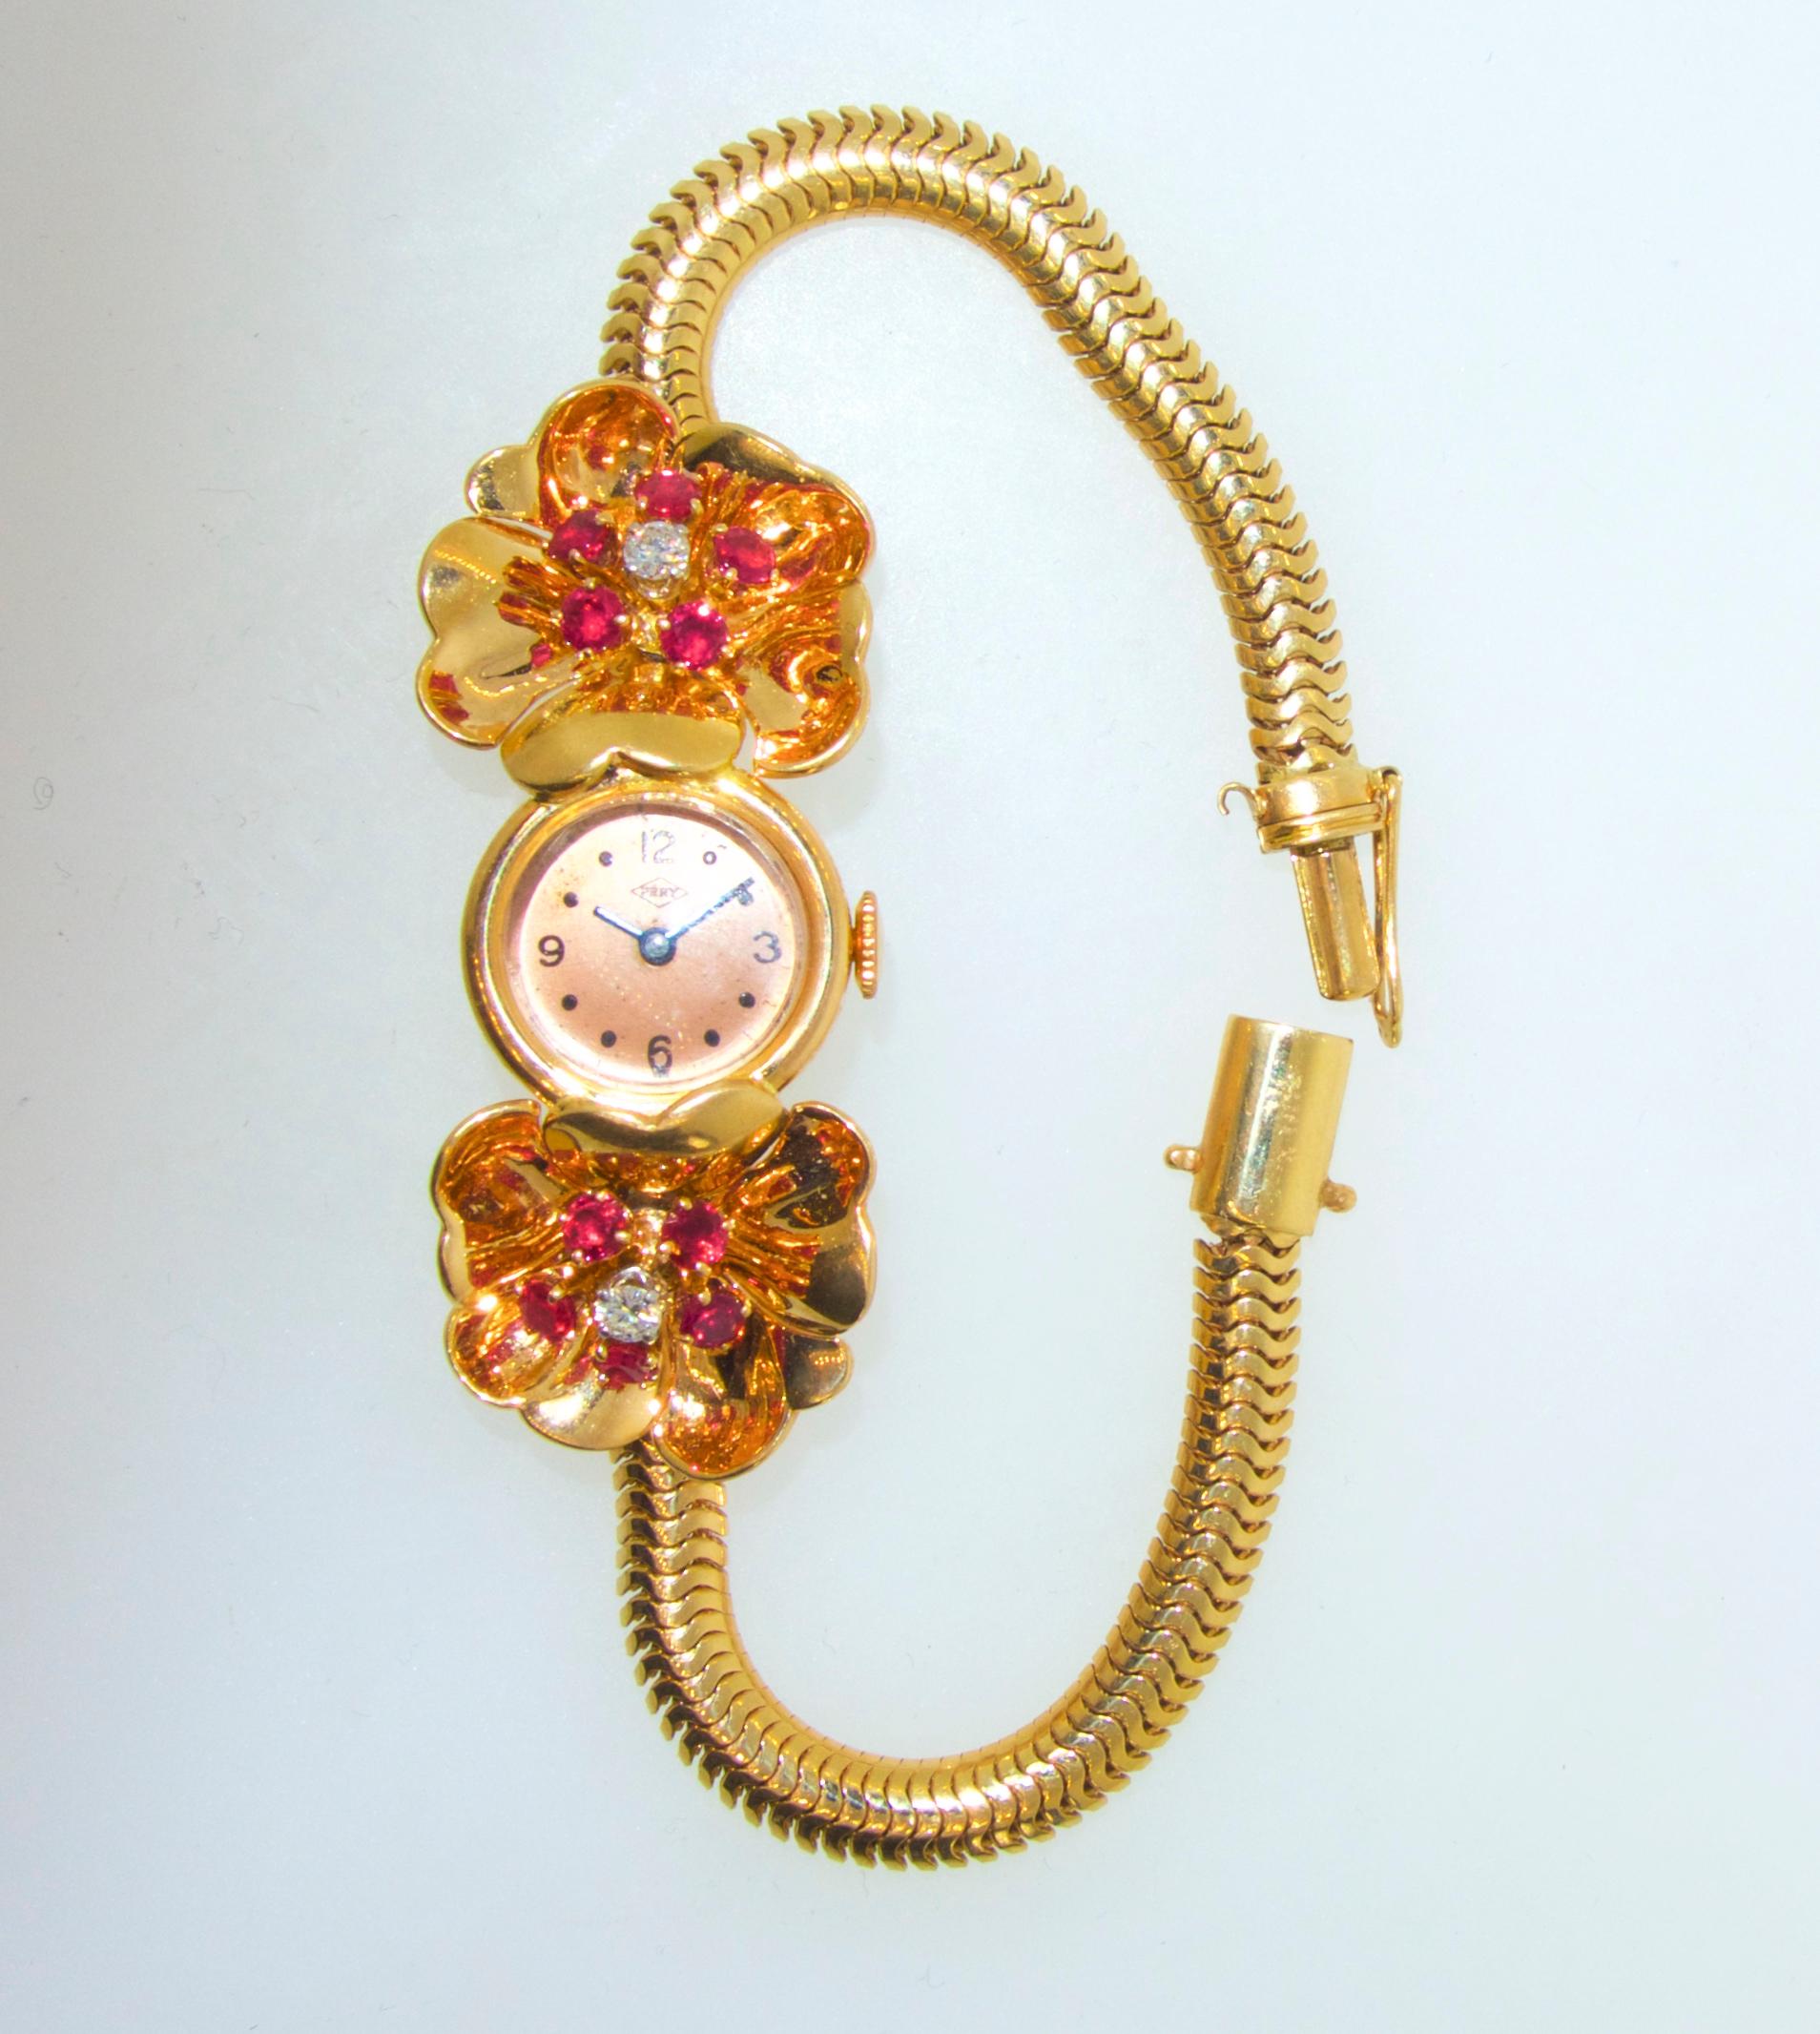 Bright red natural rubies and white diamonds create a flower motif within reflecting gold.  The watch by Pery is a manual wind in fine condition and recently services.  The watch bracelet is a good length to fit most wrists.  The clasp is well done.